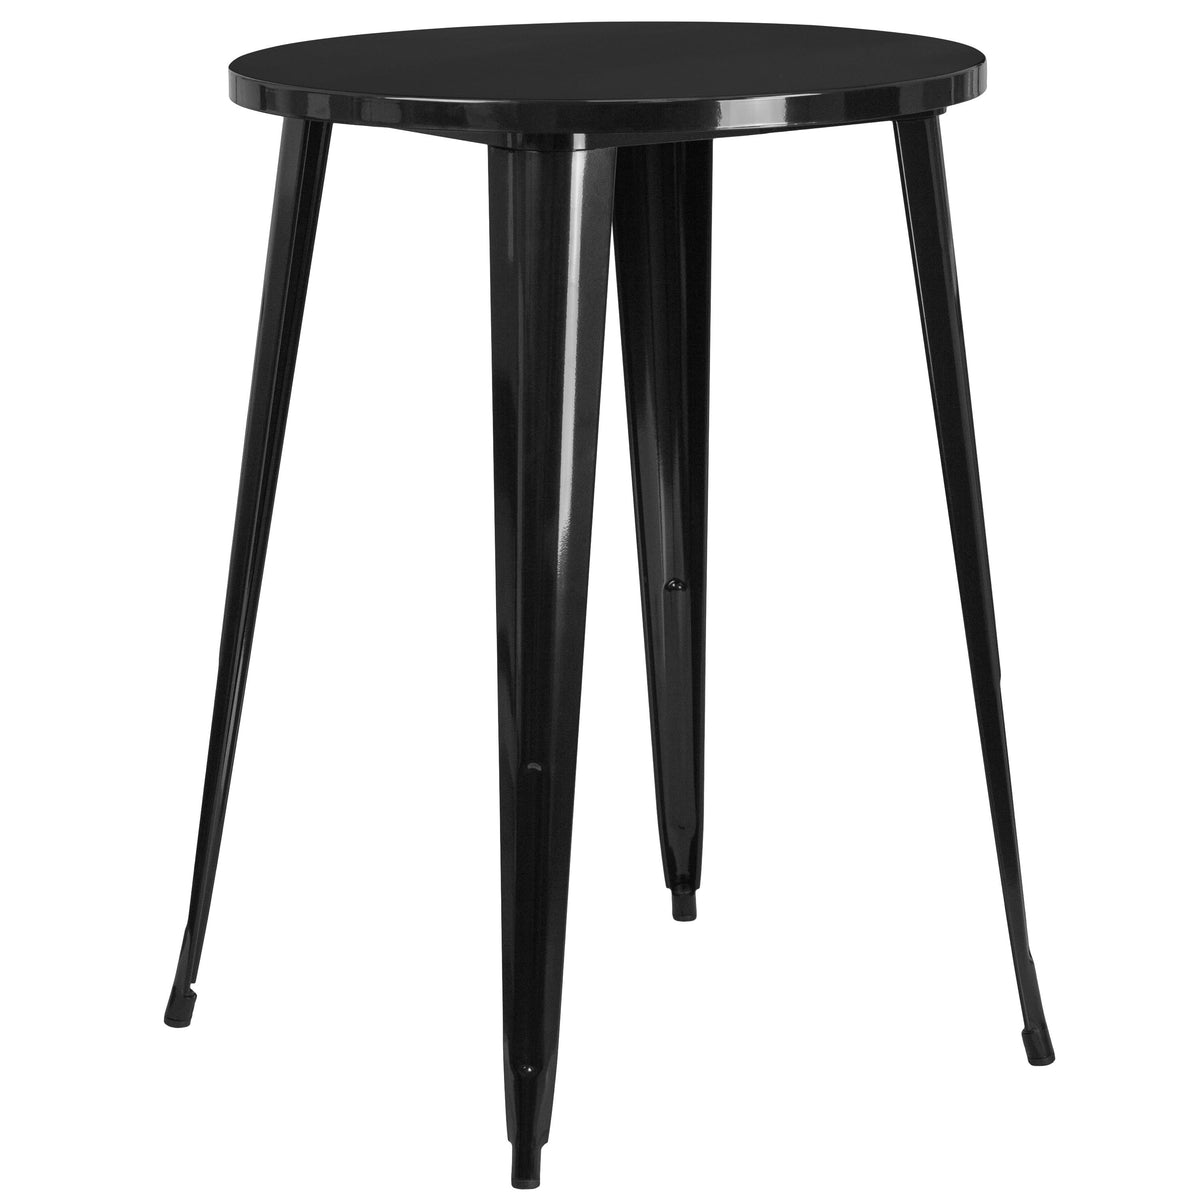 Black |#| 30inch Round Black Metal Indoor-Outdoor Bar Table Set with 4 Cafe Stools